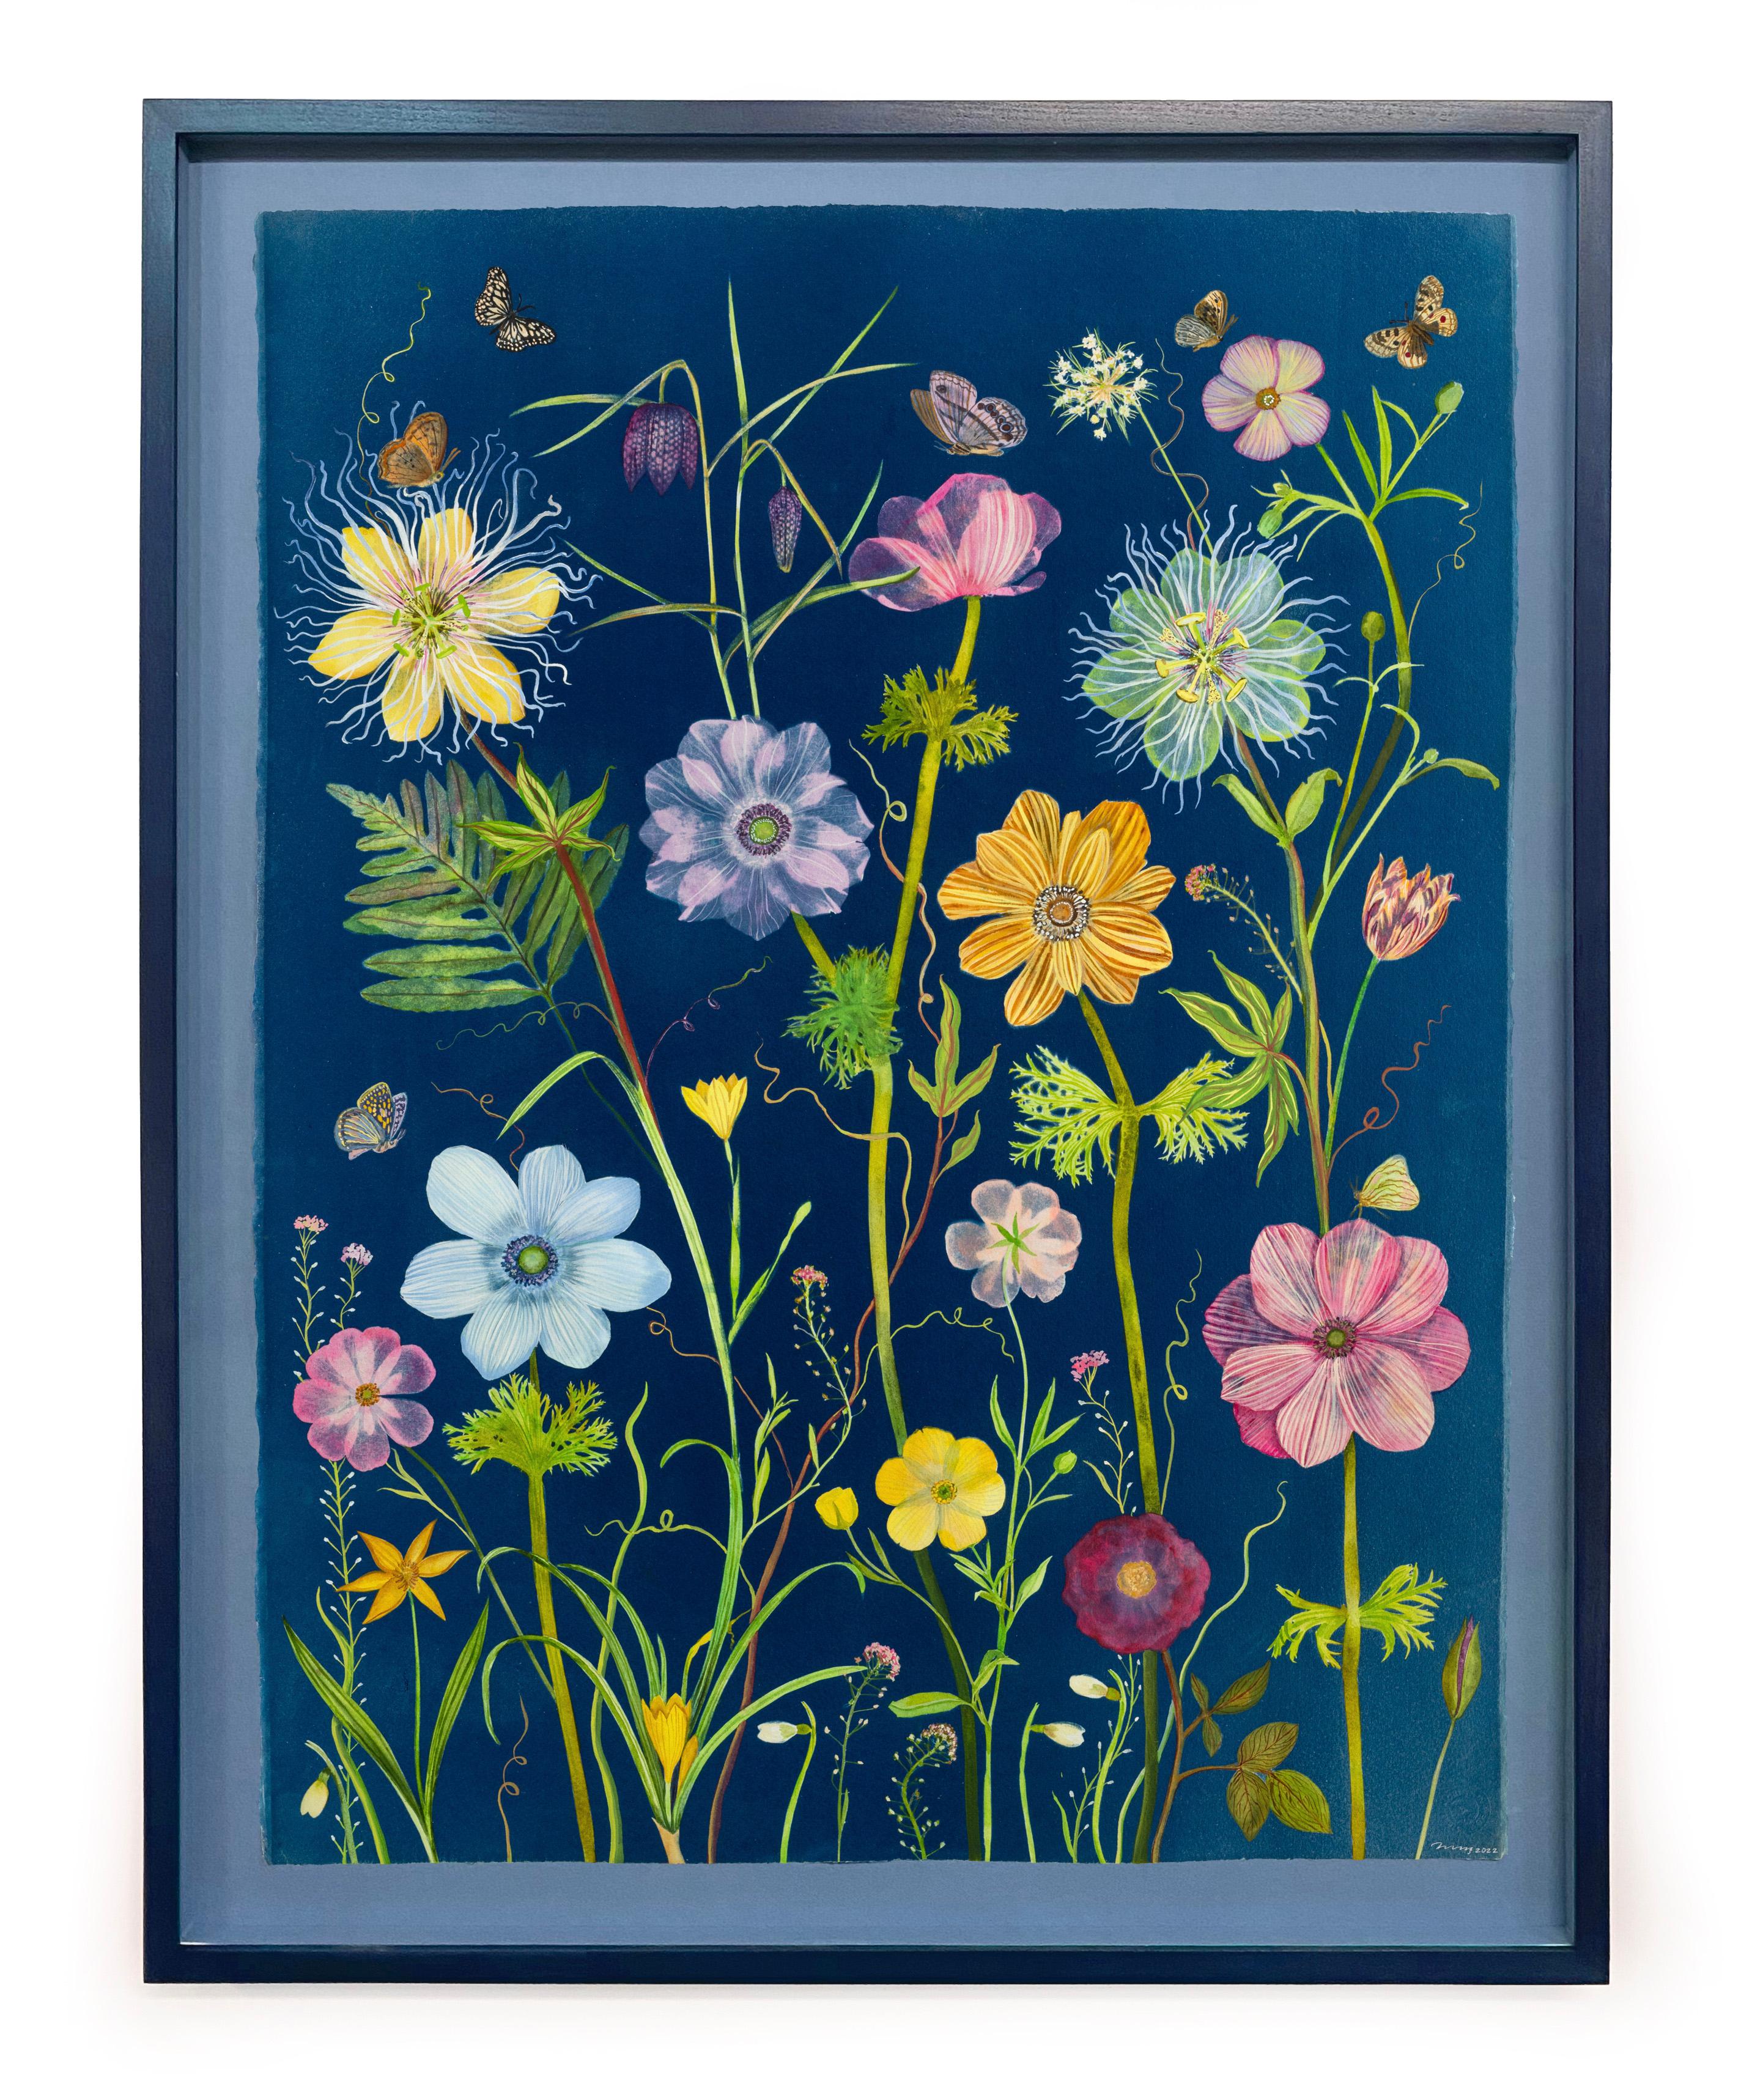 Nocturnal Nature (Still Life Painting of Colorful Flowers on Indigo Blue)